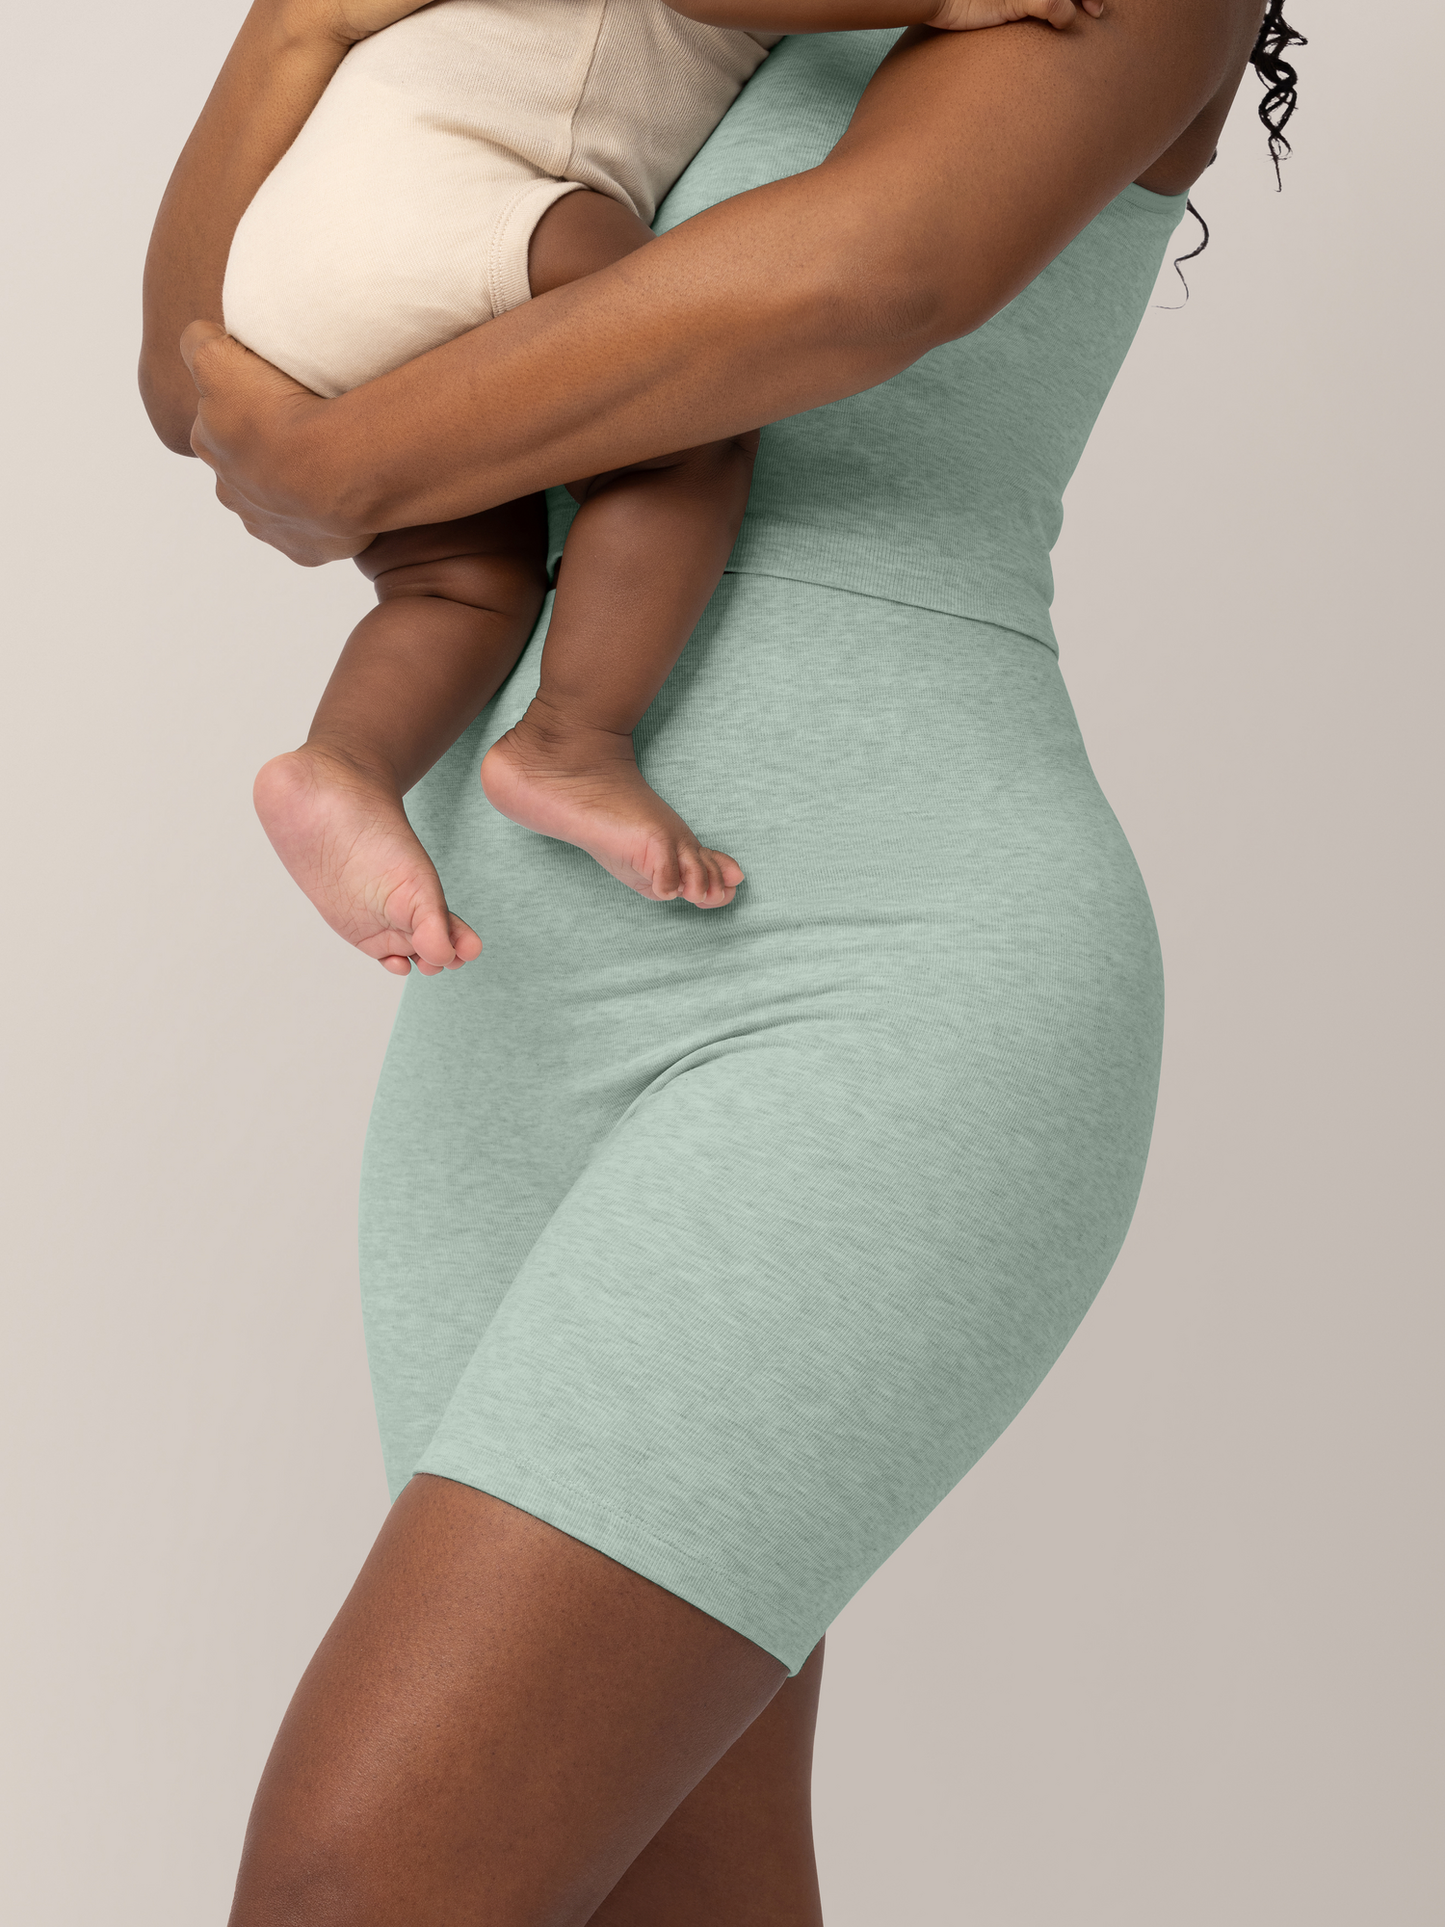 Close up 3/4 view of model holding baby and wearing the Sublime® Bamboo Maternity & Postpartum Bike Short in Dusty Blue Green Heather, paired with the matching Sublime® Bamboo Maternity & Nursing Longline Bra.